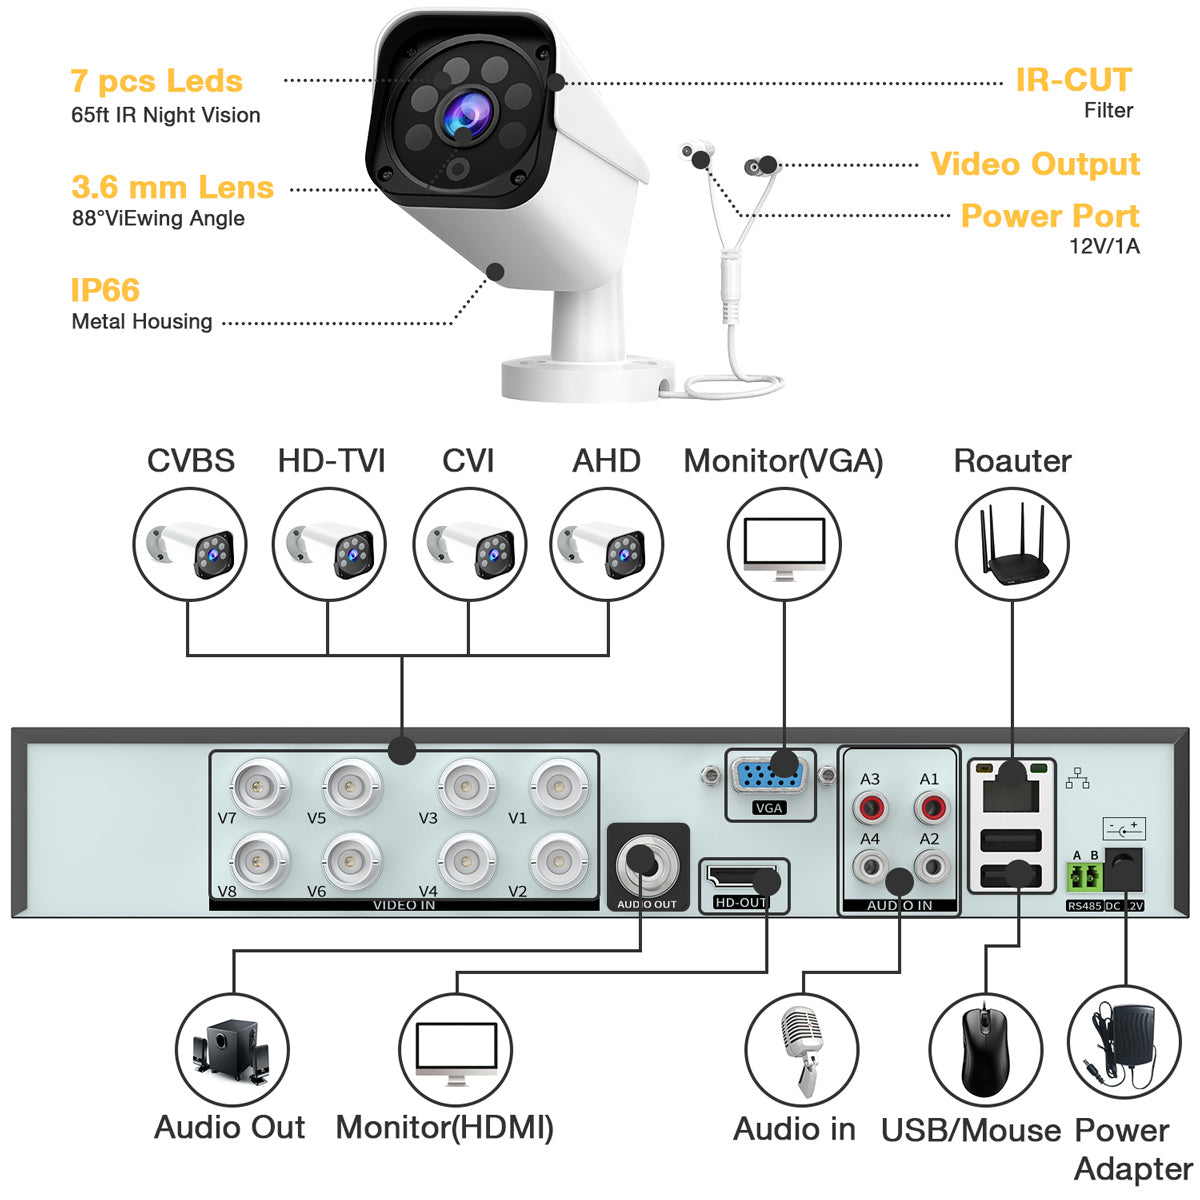 Campark W208 8CH 1080P Lite Wired DVR Security Cameras System with 3TB Hard Drive (Only available in the US)